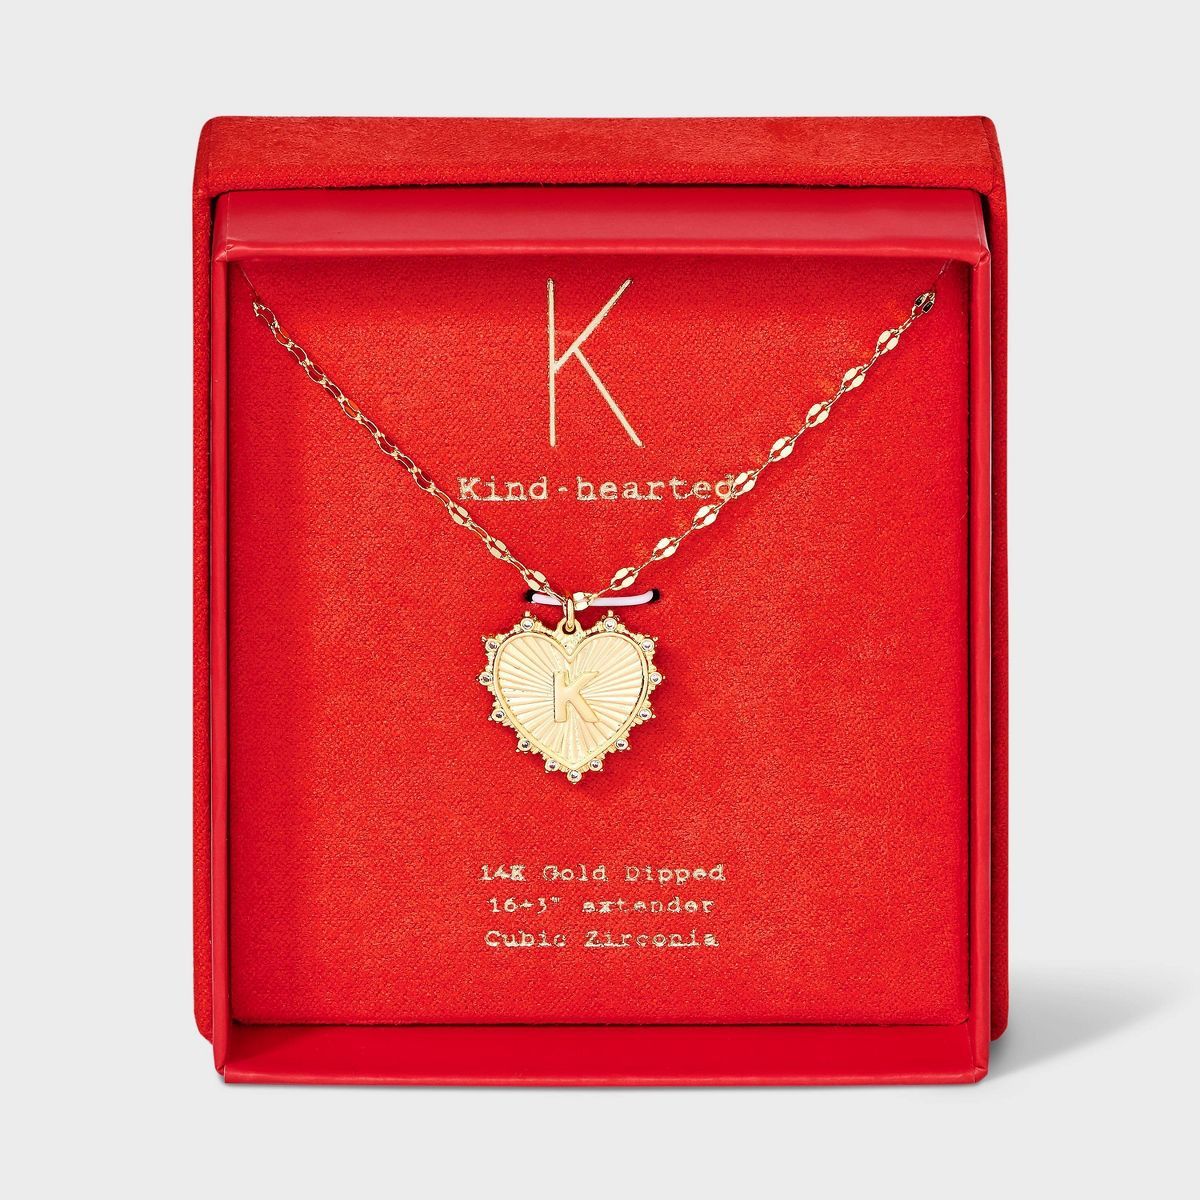 14K Gold Dipped Diamond Ray Initial "K" Heart Tag Necklace - A New Day™ Gold | Target